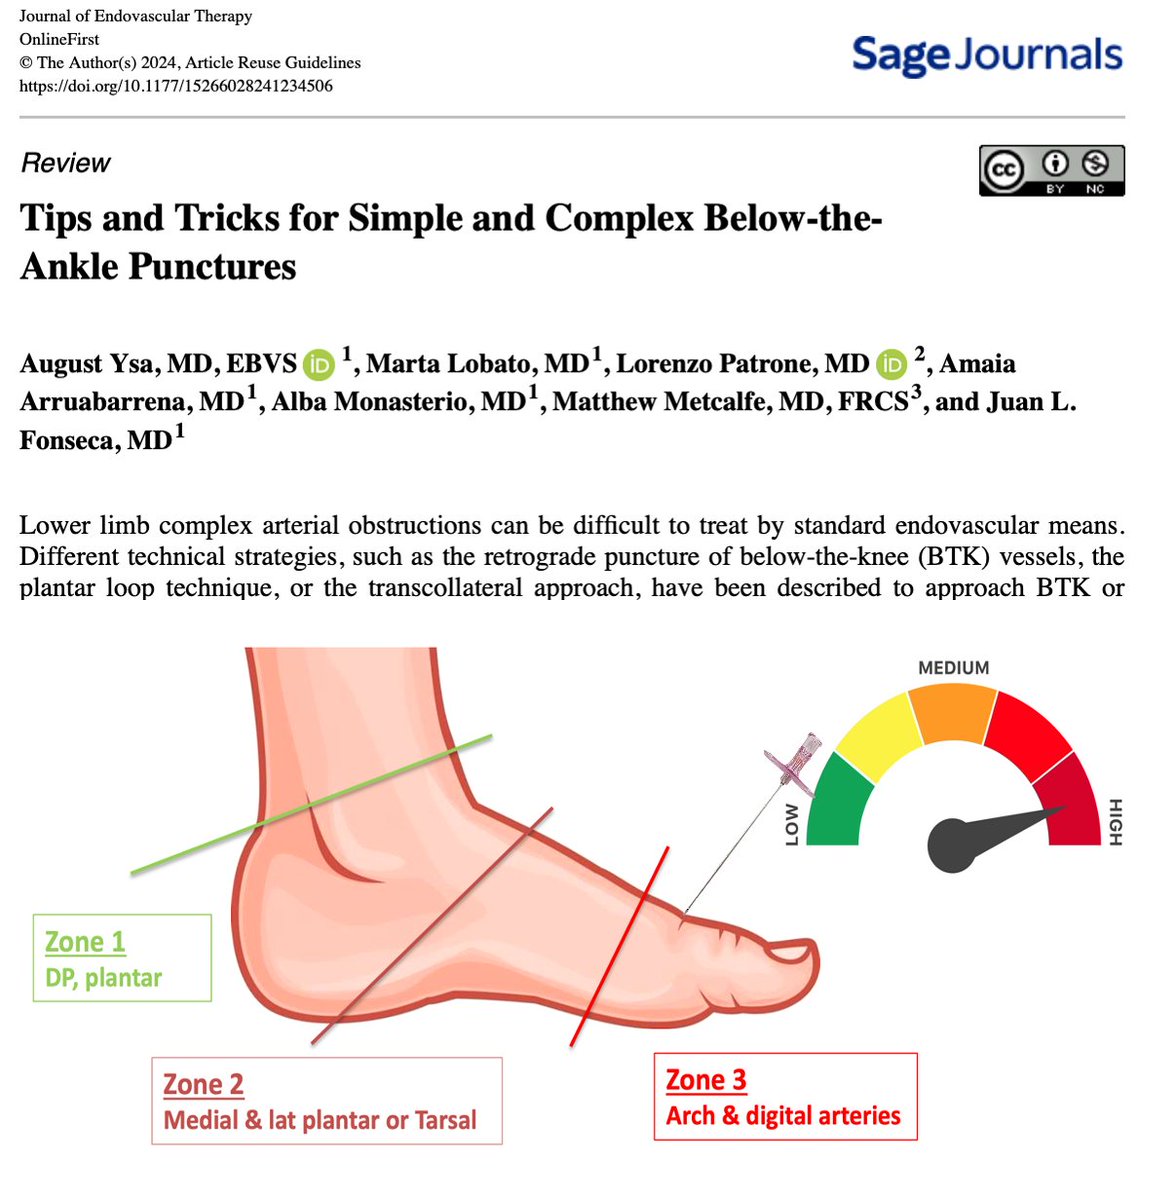 Hot off the press! TIPS & TRICKS for simple and complex BTA PUNCTURES 🆓 at doi.org/10.1177/152660… Feel free to 👍🏻 or 🔁 it among your colleagues or fellows! @Vascupedia_com @_backtable @CLI_Global